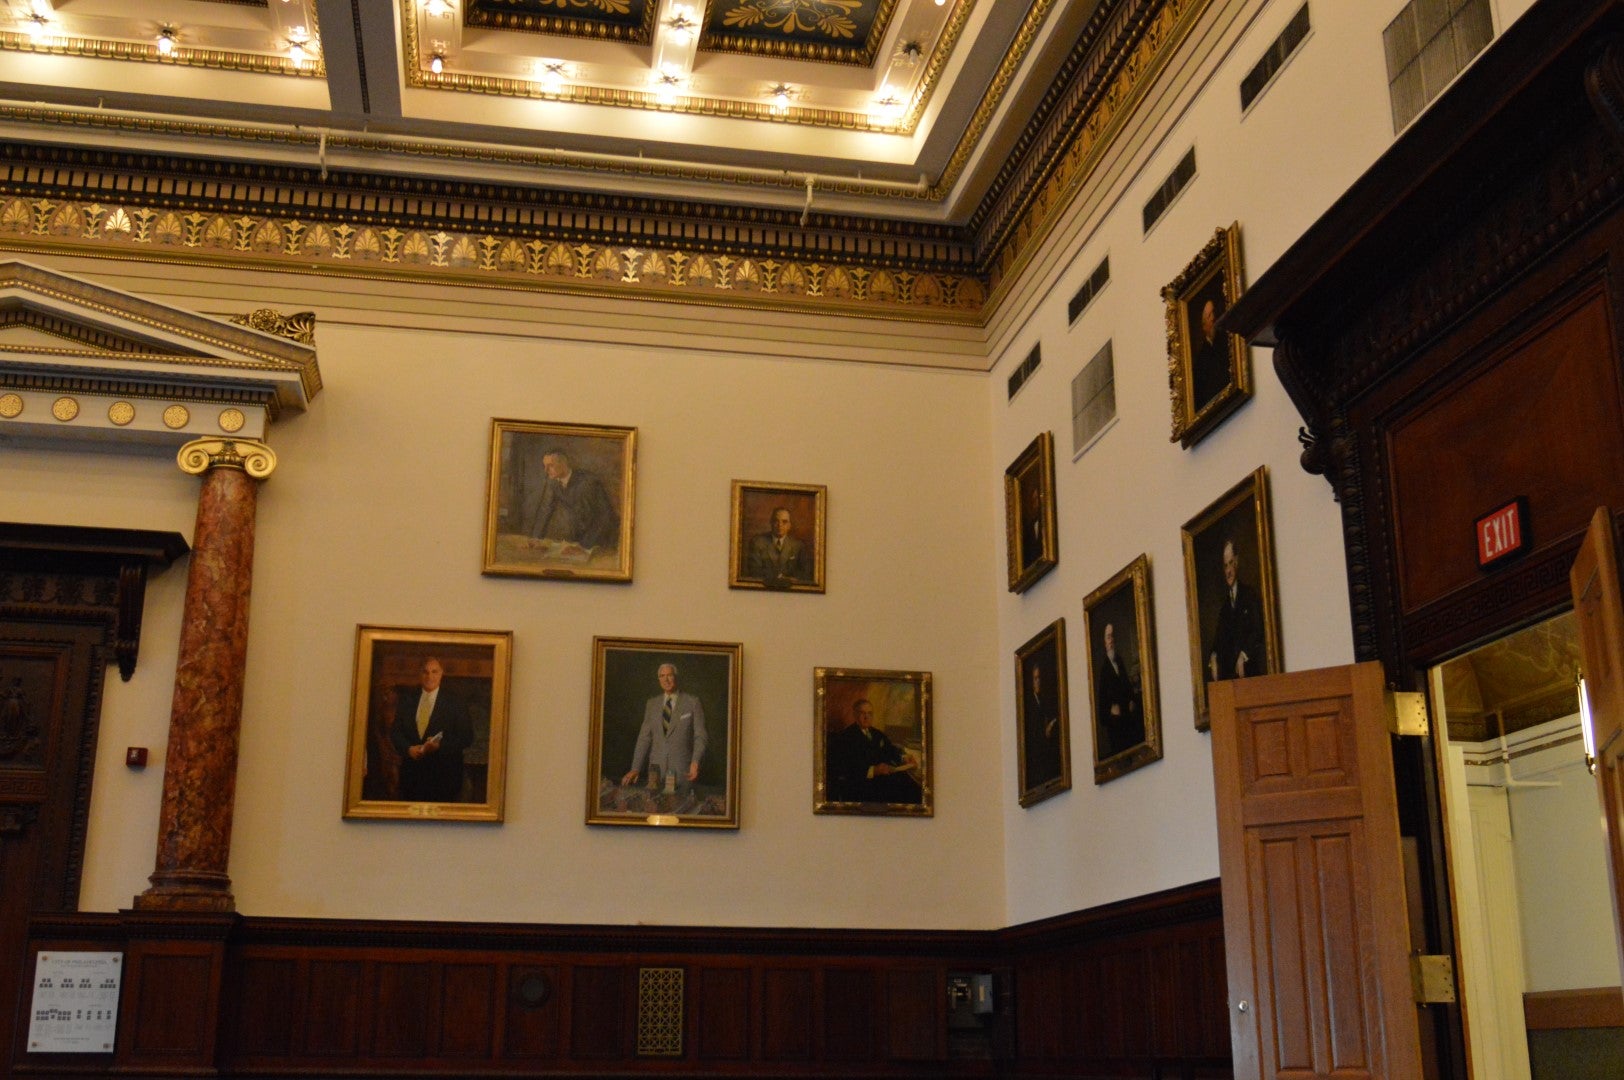 Former Mayor Ed Rendell is the most recent Philadelphia mayor to have his portrait hanging on the walls of City Hall.  John Street left office in 2008